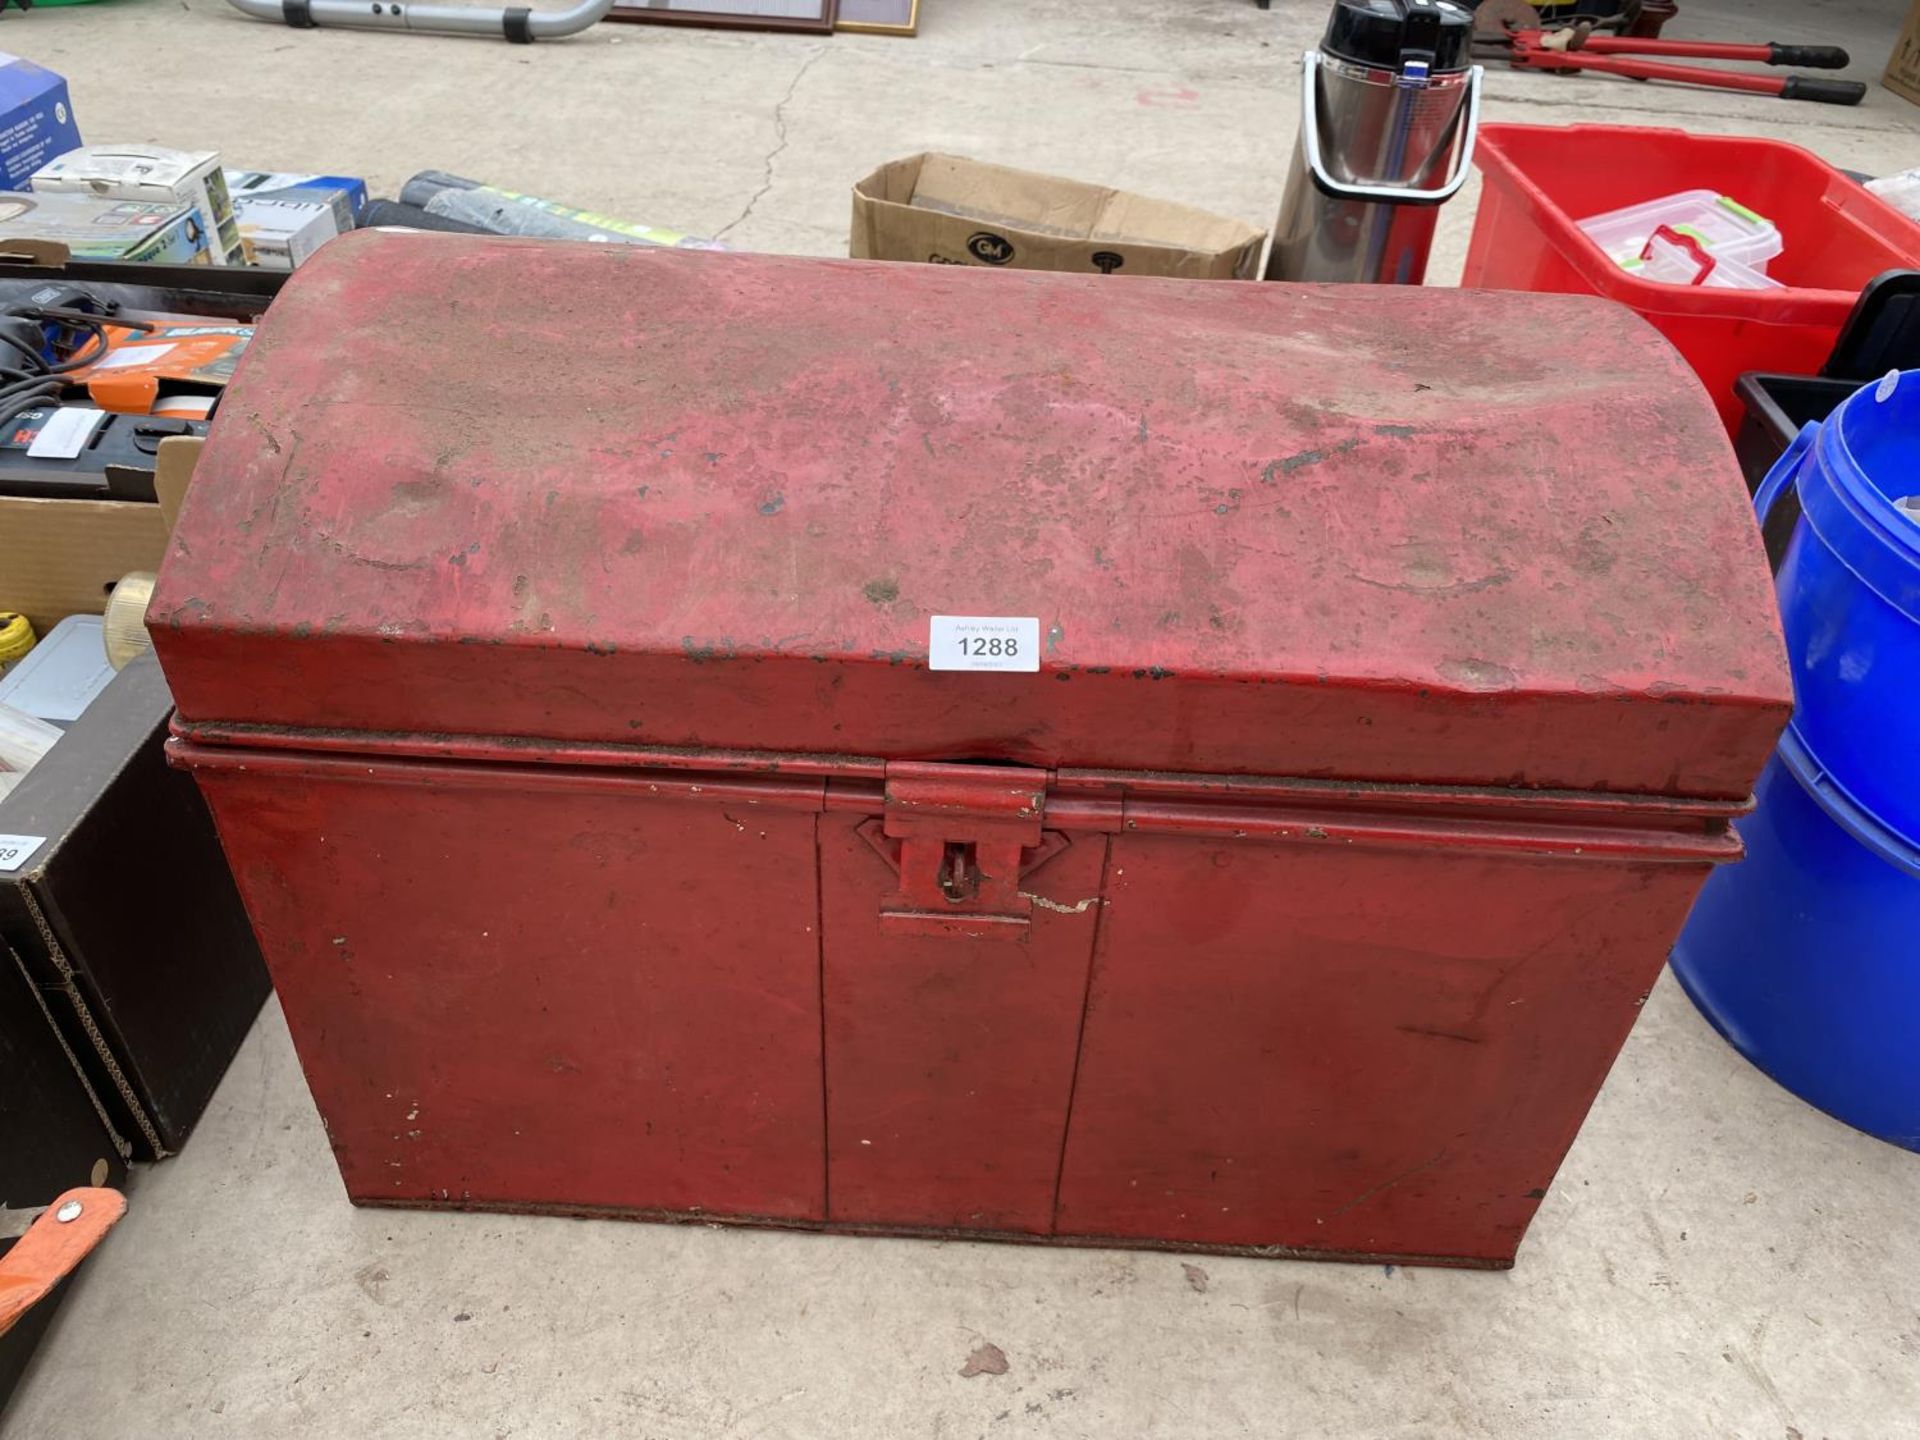 A SMALL VINTAGE METAL STORAGE TRUNK